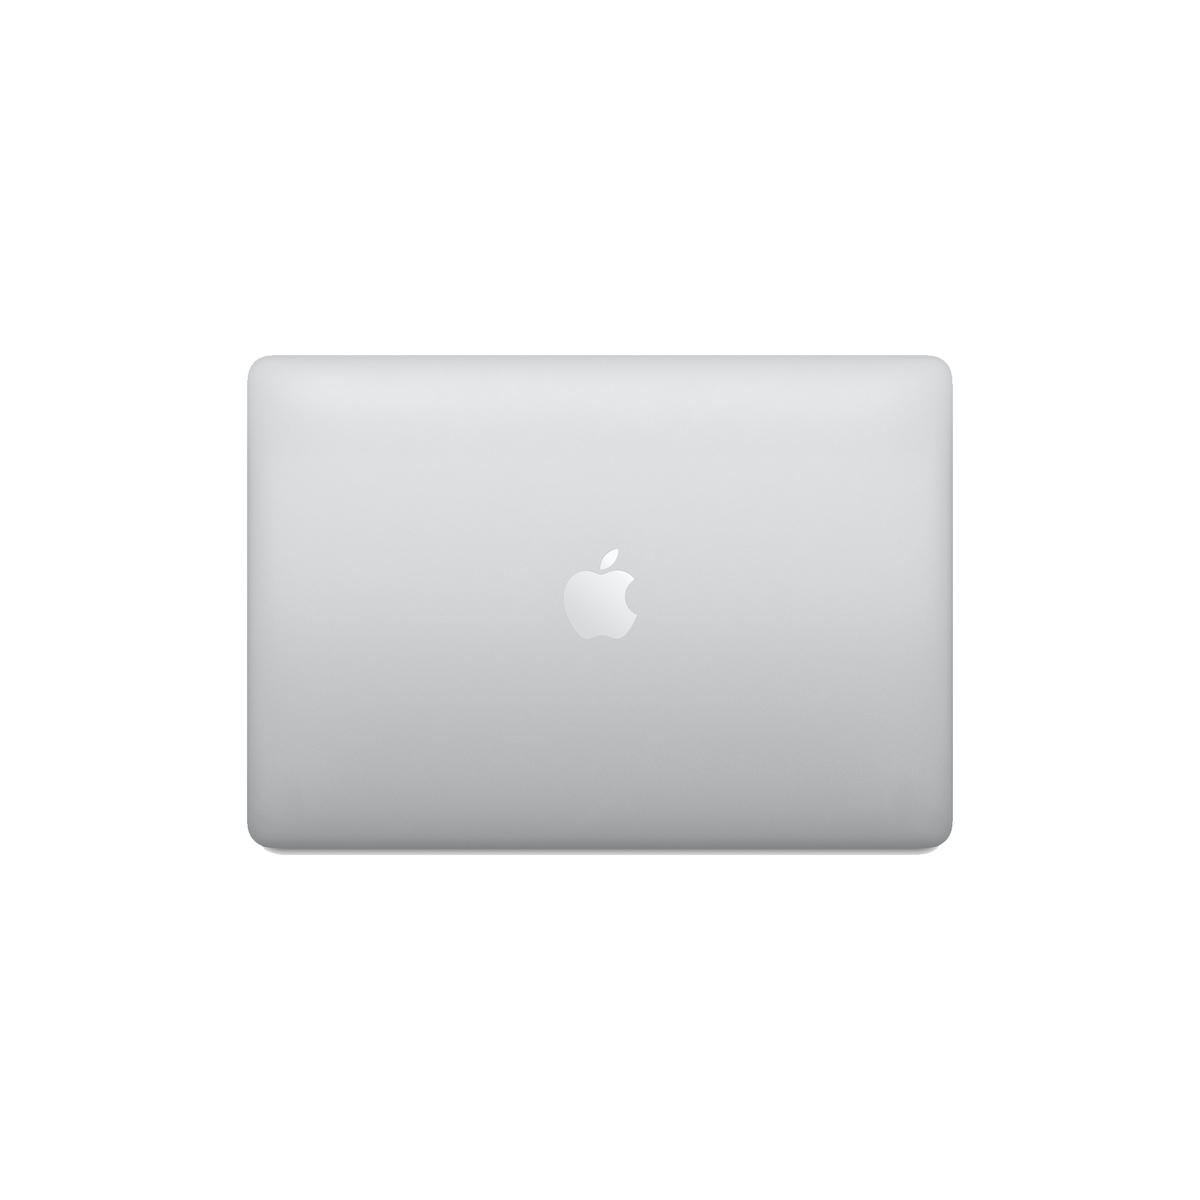 Apple MacBook Pro 13"(MYDC2AB/A), Apple M1 chip with 8‑core CPU and 8‑core GPU, 512GB SSD - Silver